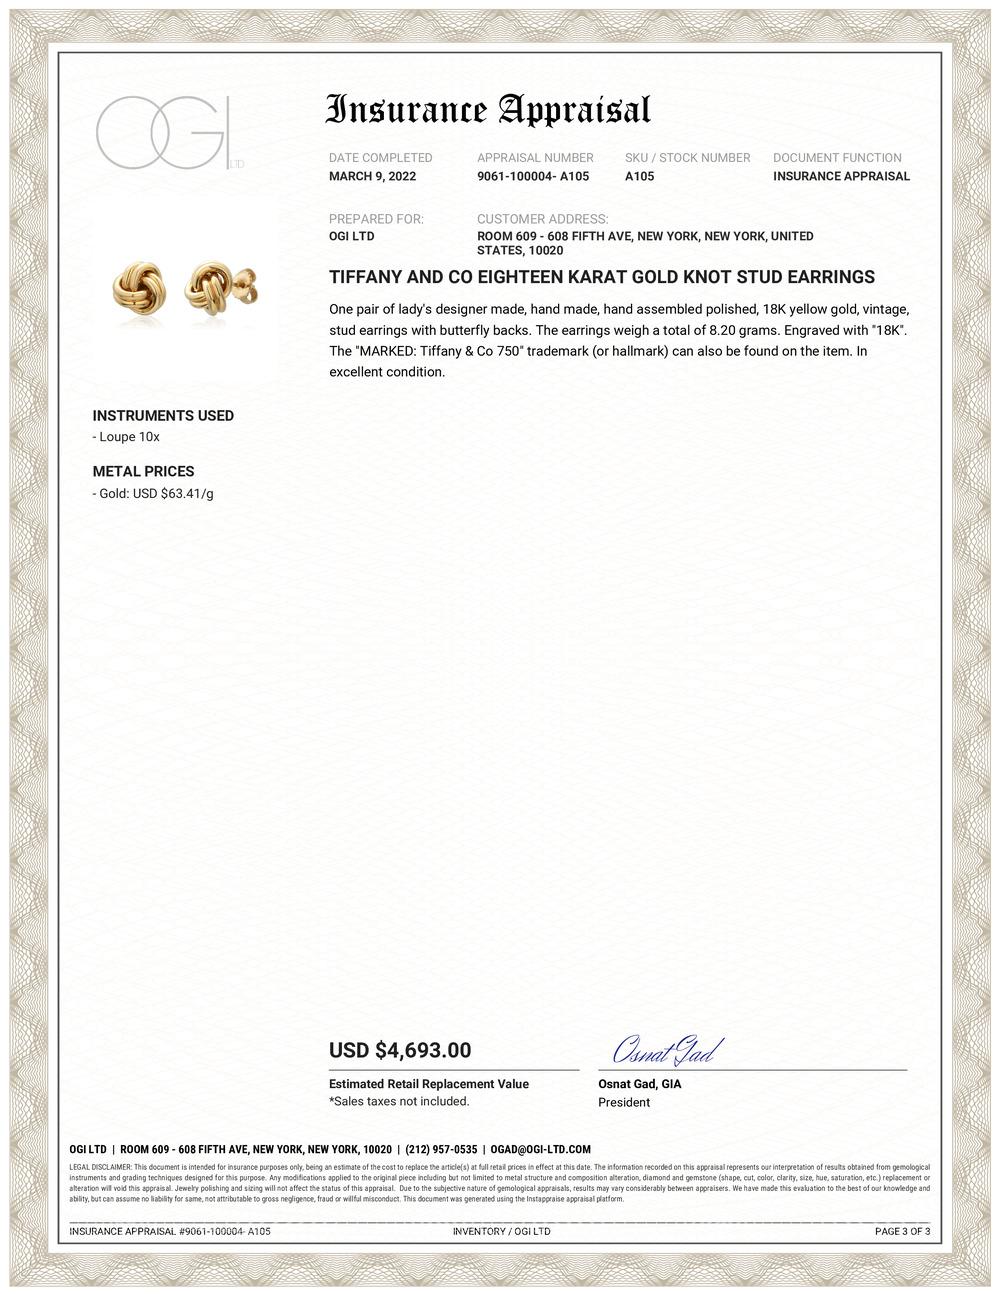 Tiffany & Co eighteen karat yellow gold knot stud earrings
Earrings measuring 10.5mm x 10.5mm, 0.42 inch by 0.42 inch
Marking T & Co 750
Tiffany's knot earrings are symbolize the power of connections between people
Weighting 8.2 grams
Original pouch